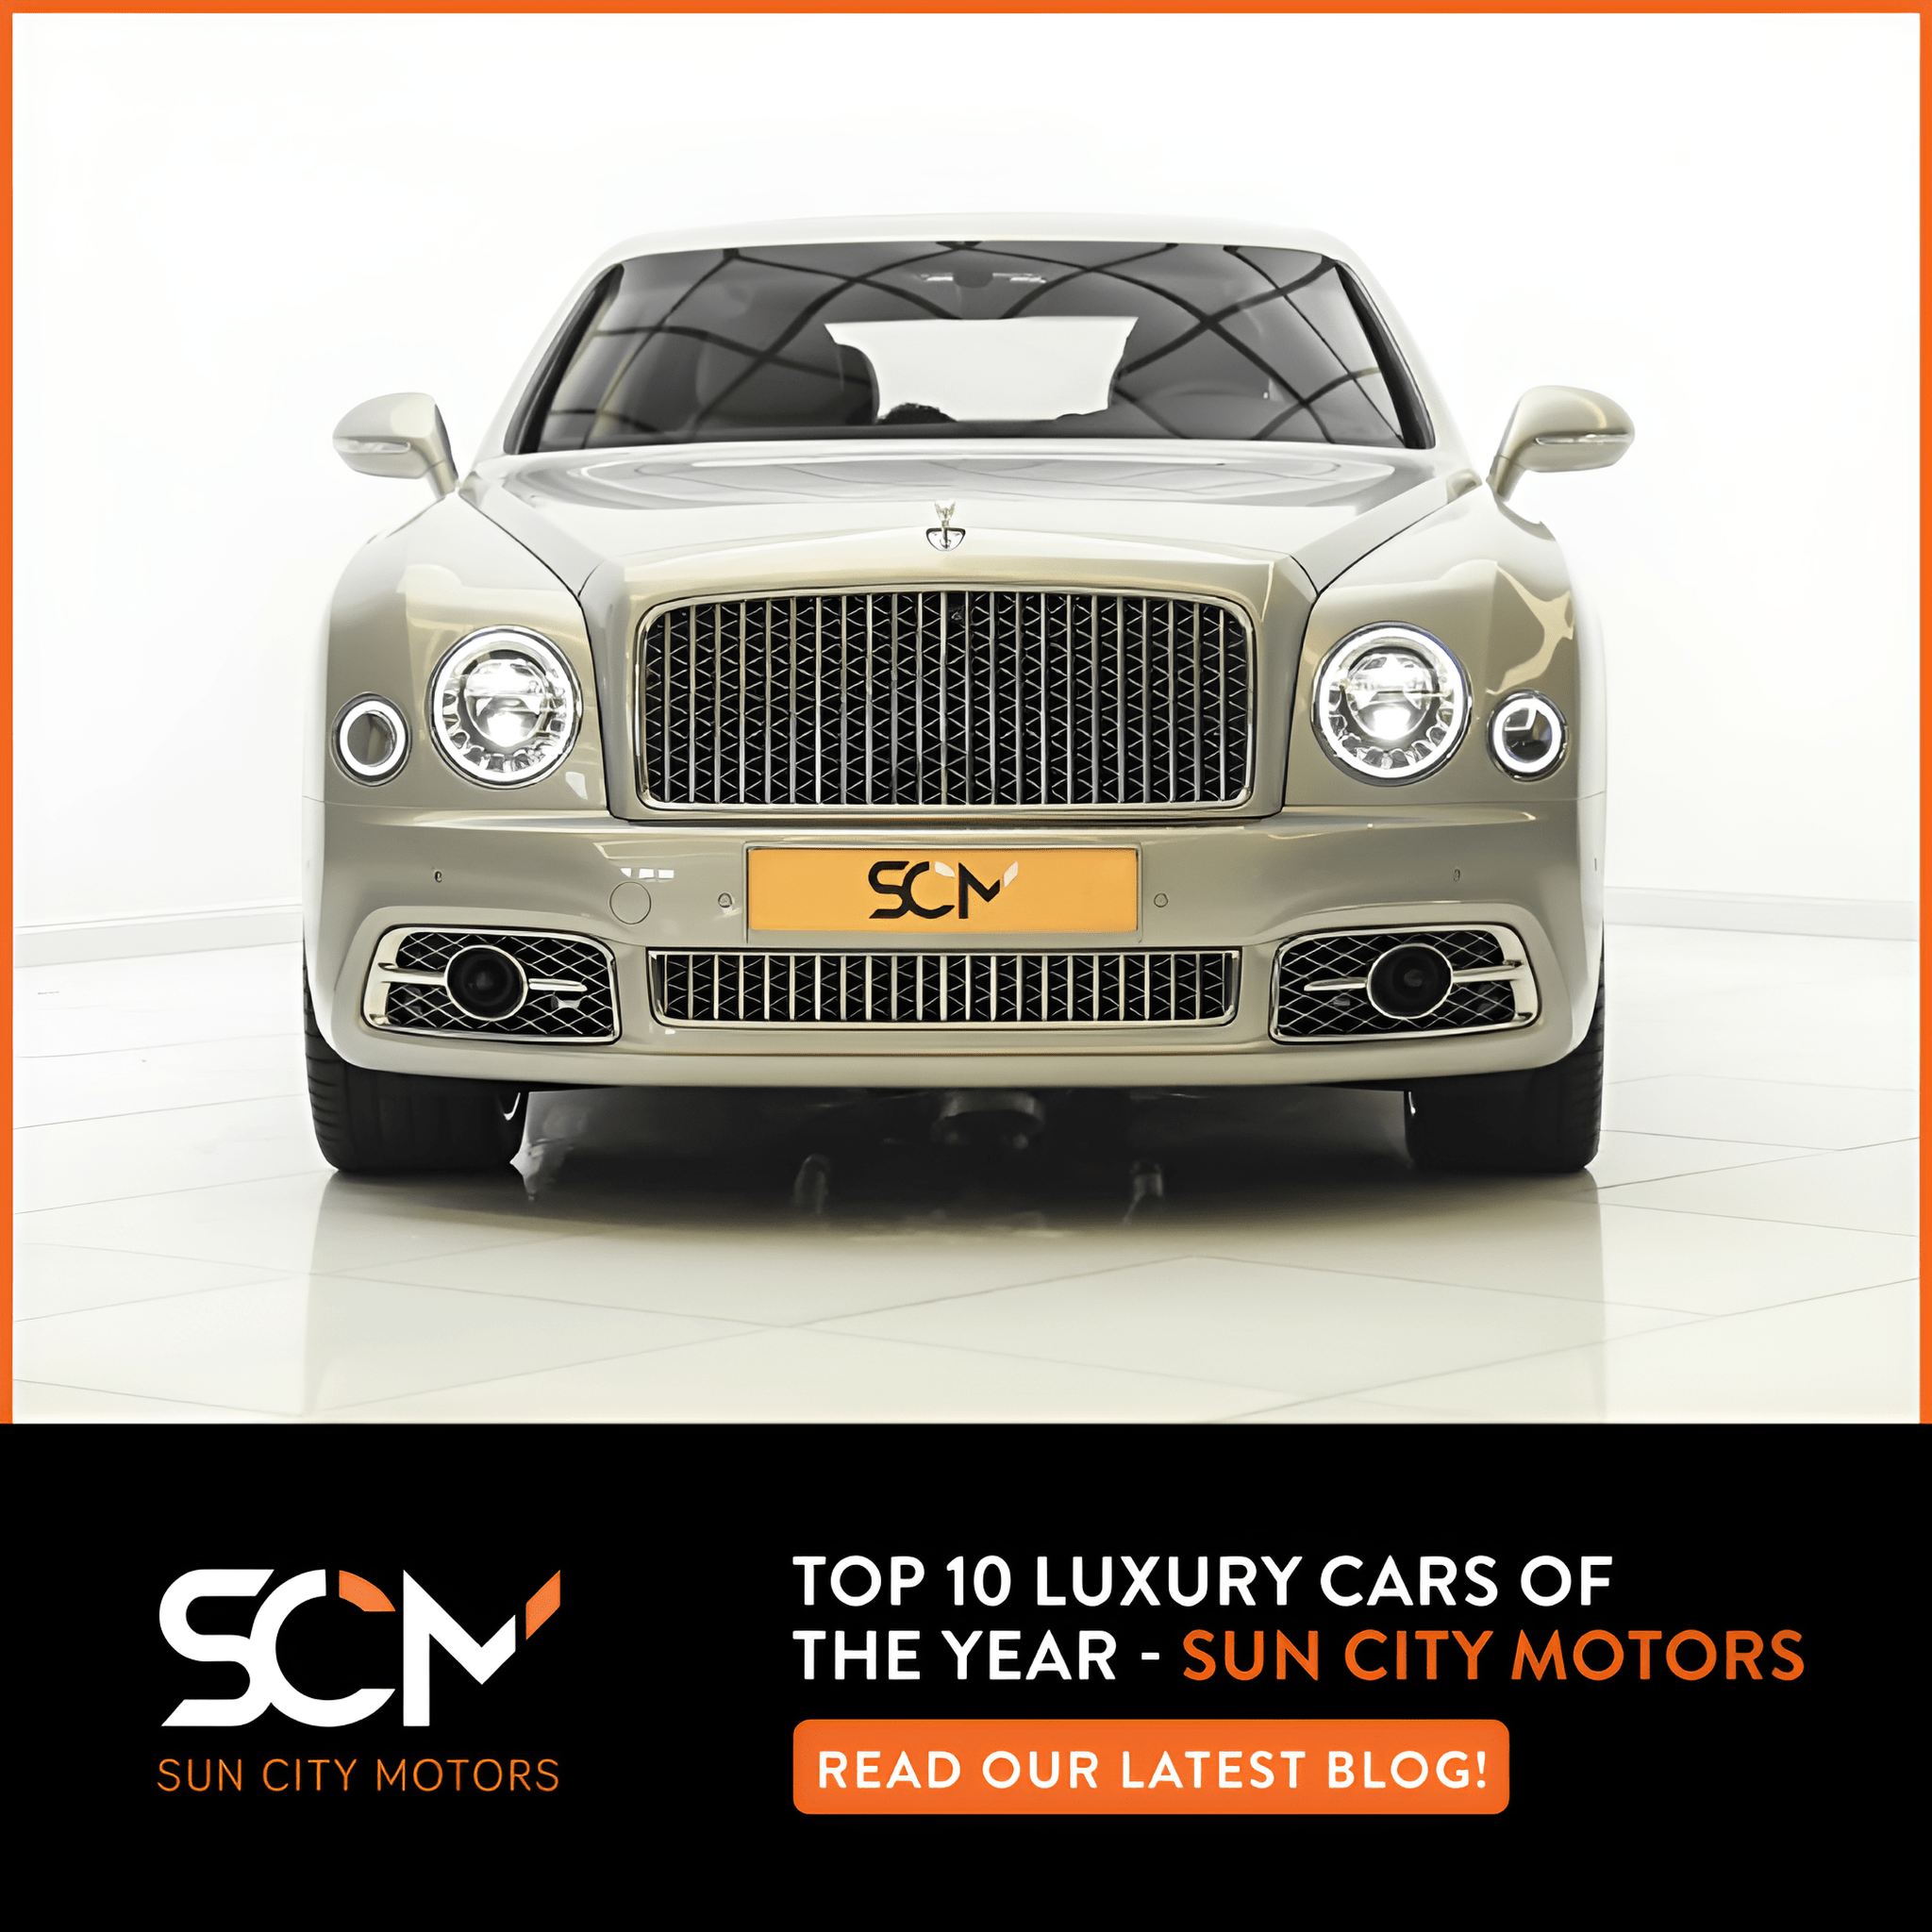 Top 10 Luxury Cars of the Year You Must Consider